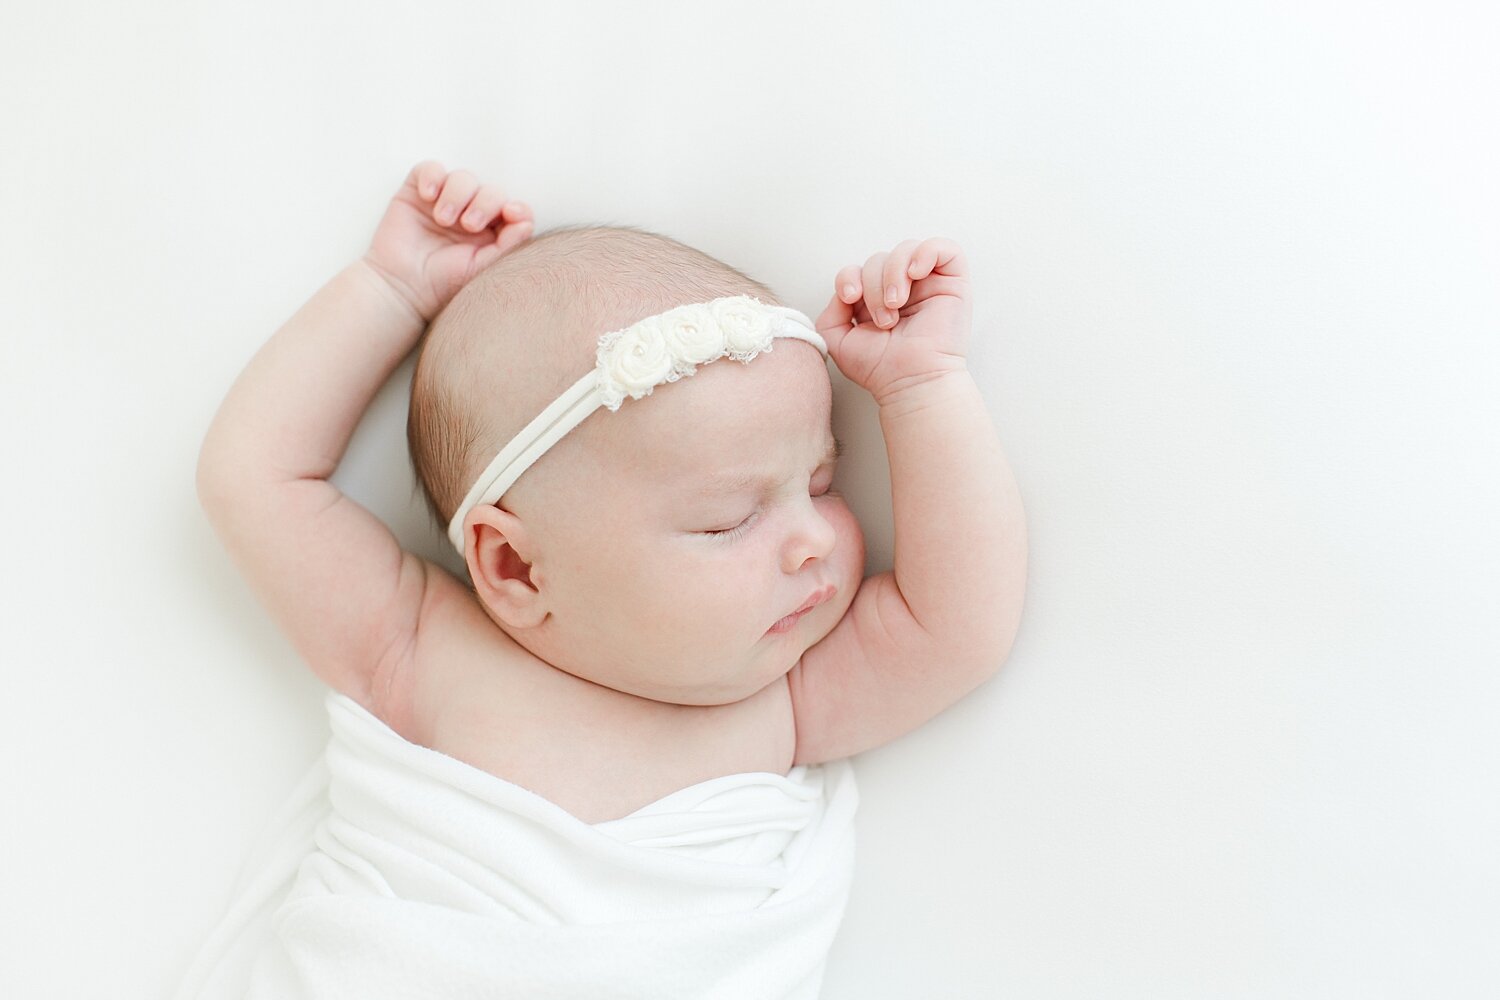 Baby girl sleeping with arms up during newborn photos with Kristin Wood Photography.